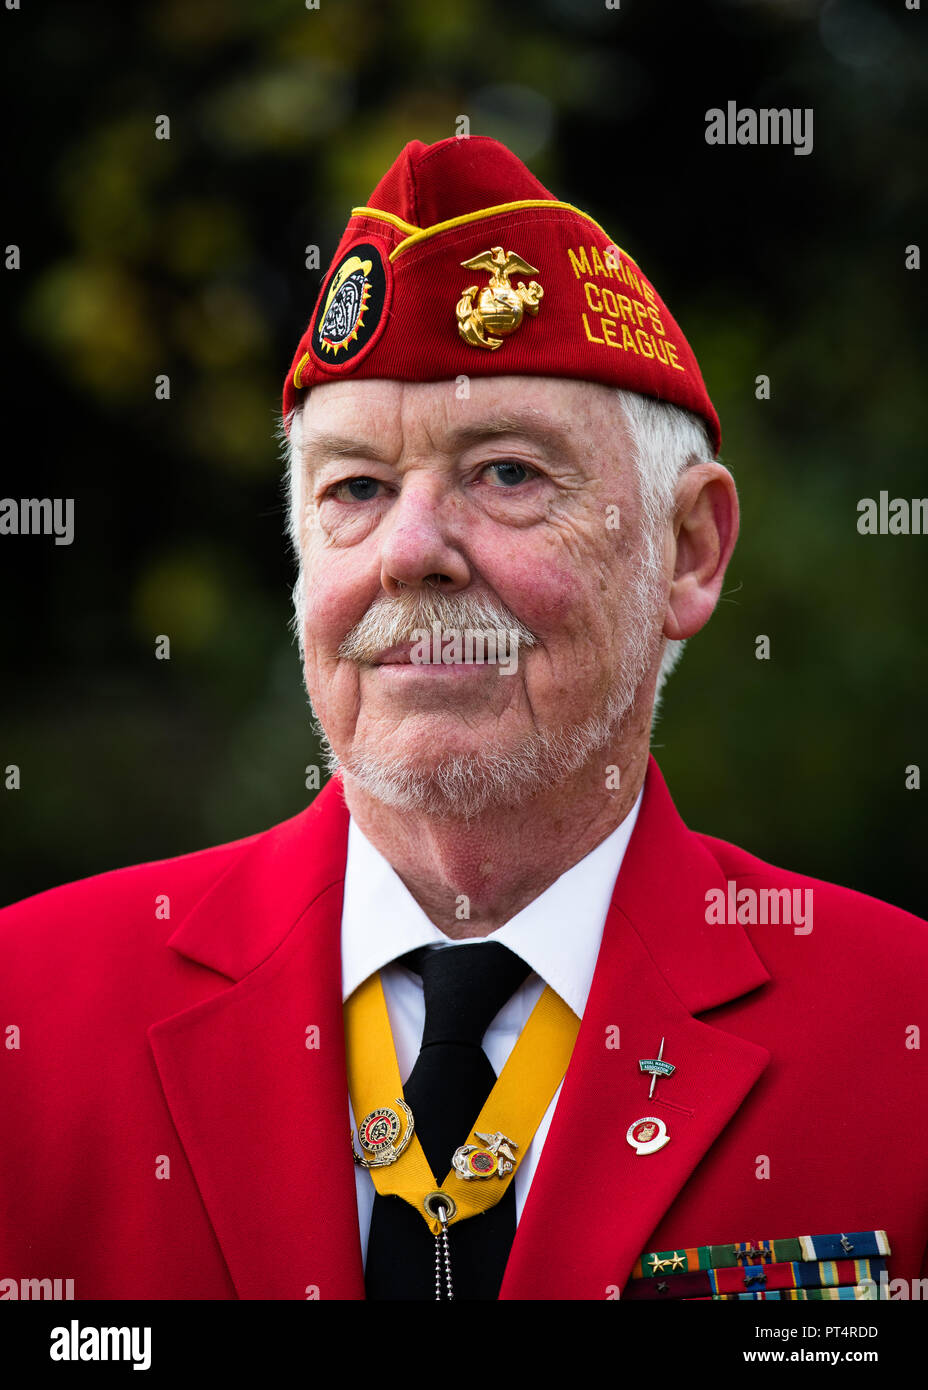 US Marine veteran wearing a red cap and his medals at the Remembrance Day parade, London. Stock Photo